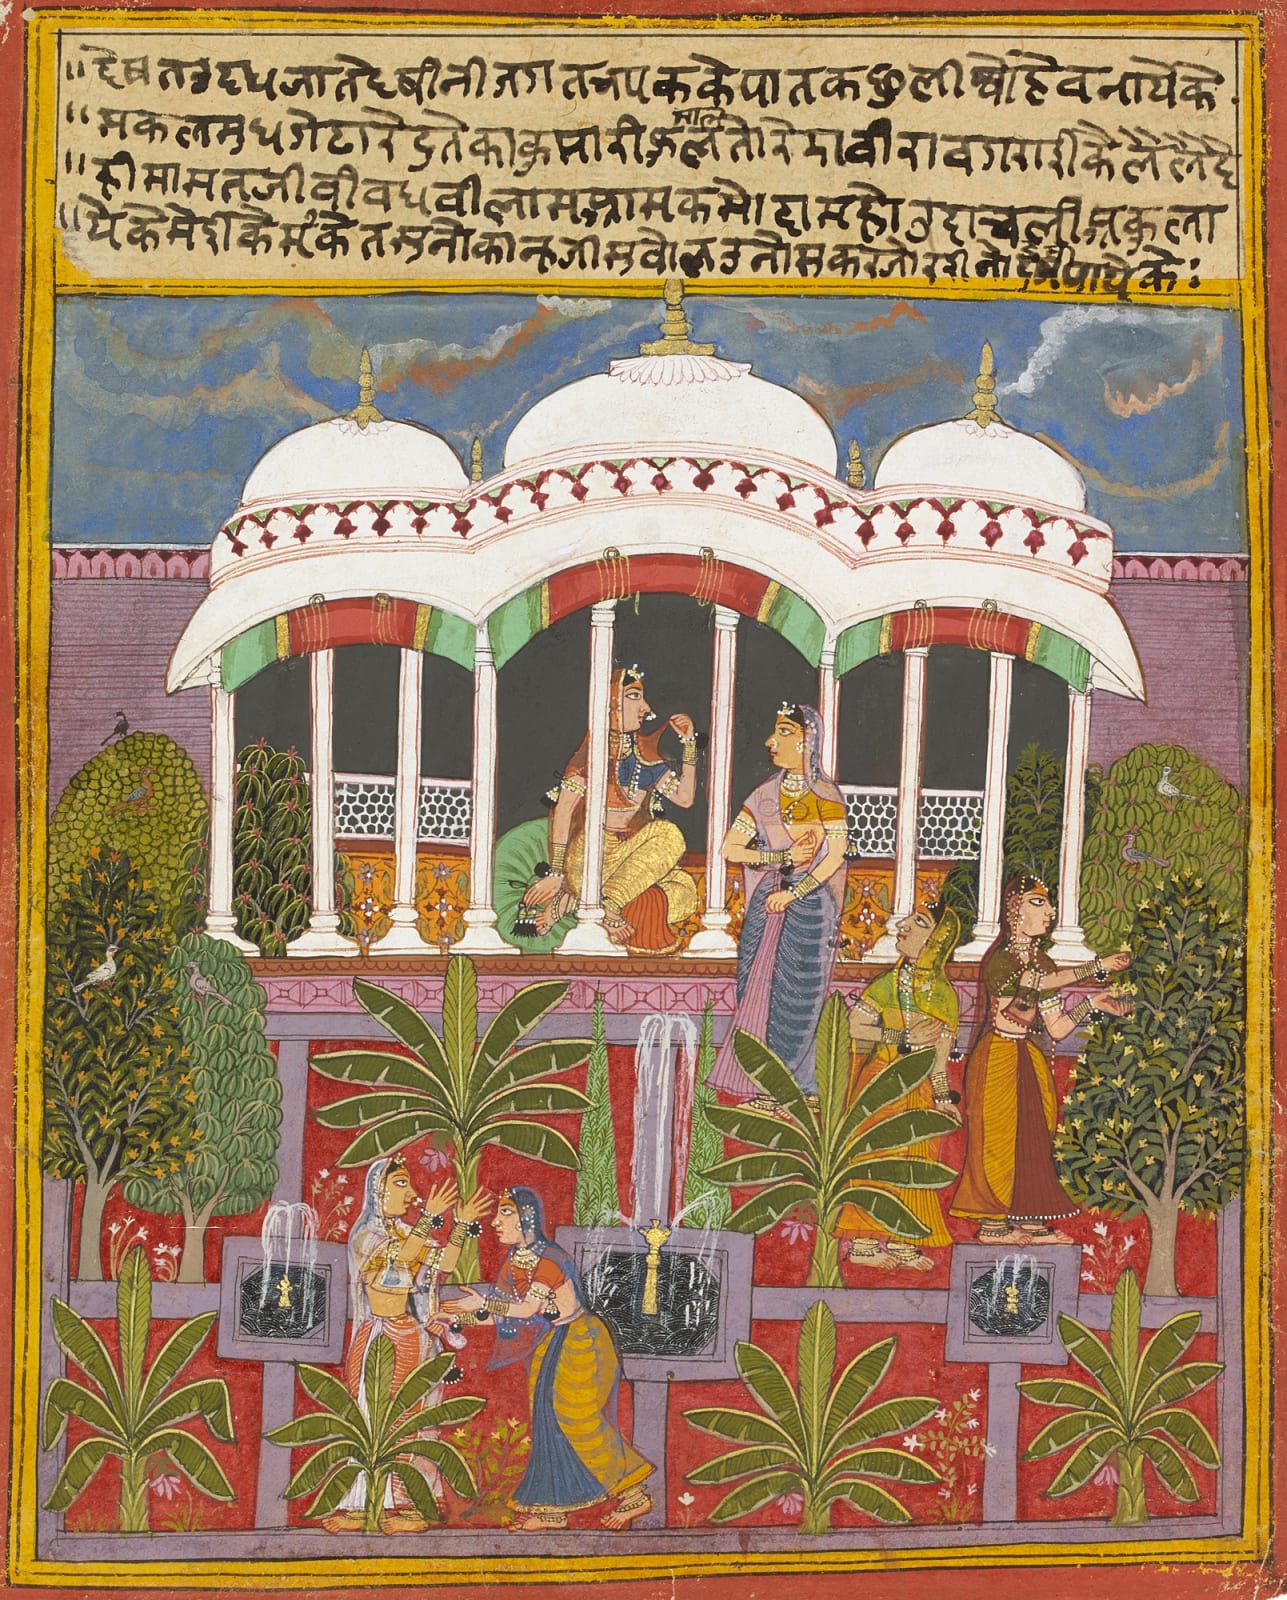 The Distraught Heroine - An Illustration from a Rasikapriya (The Cultivated Lover), India, Mewar, c. 1660